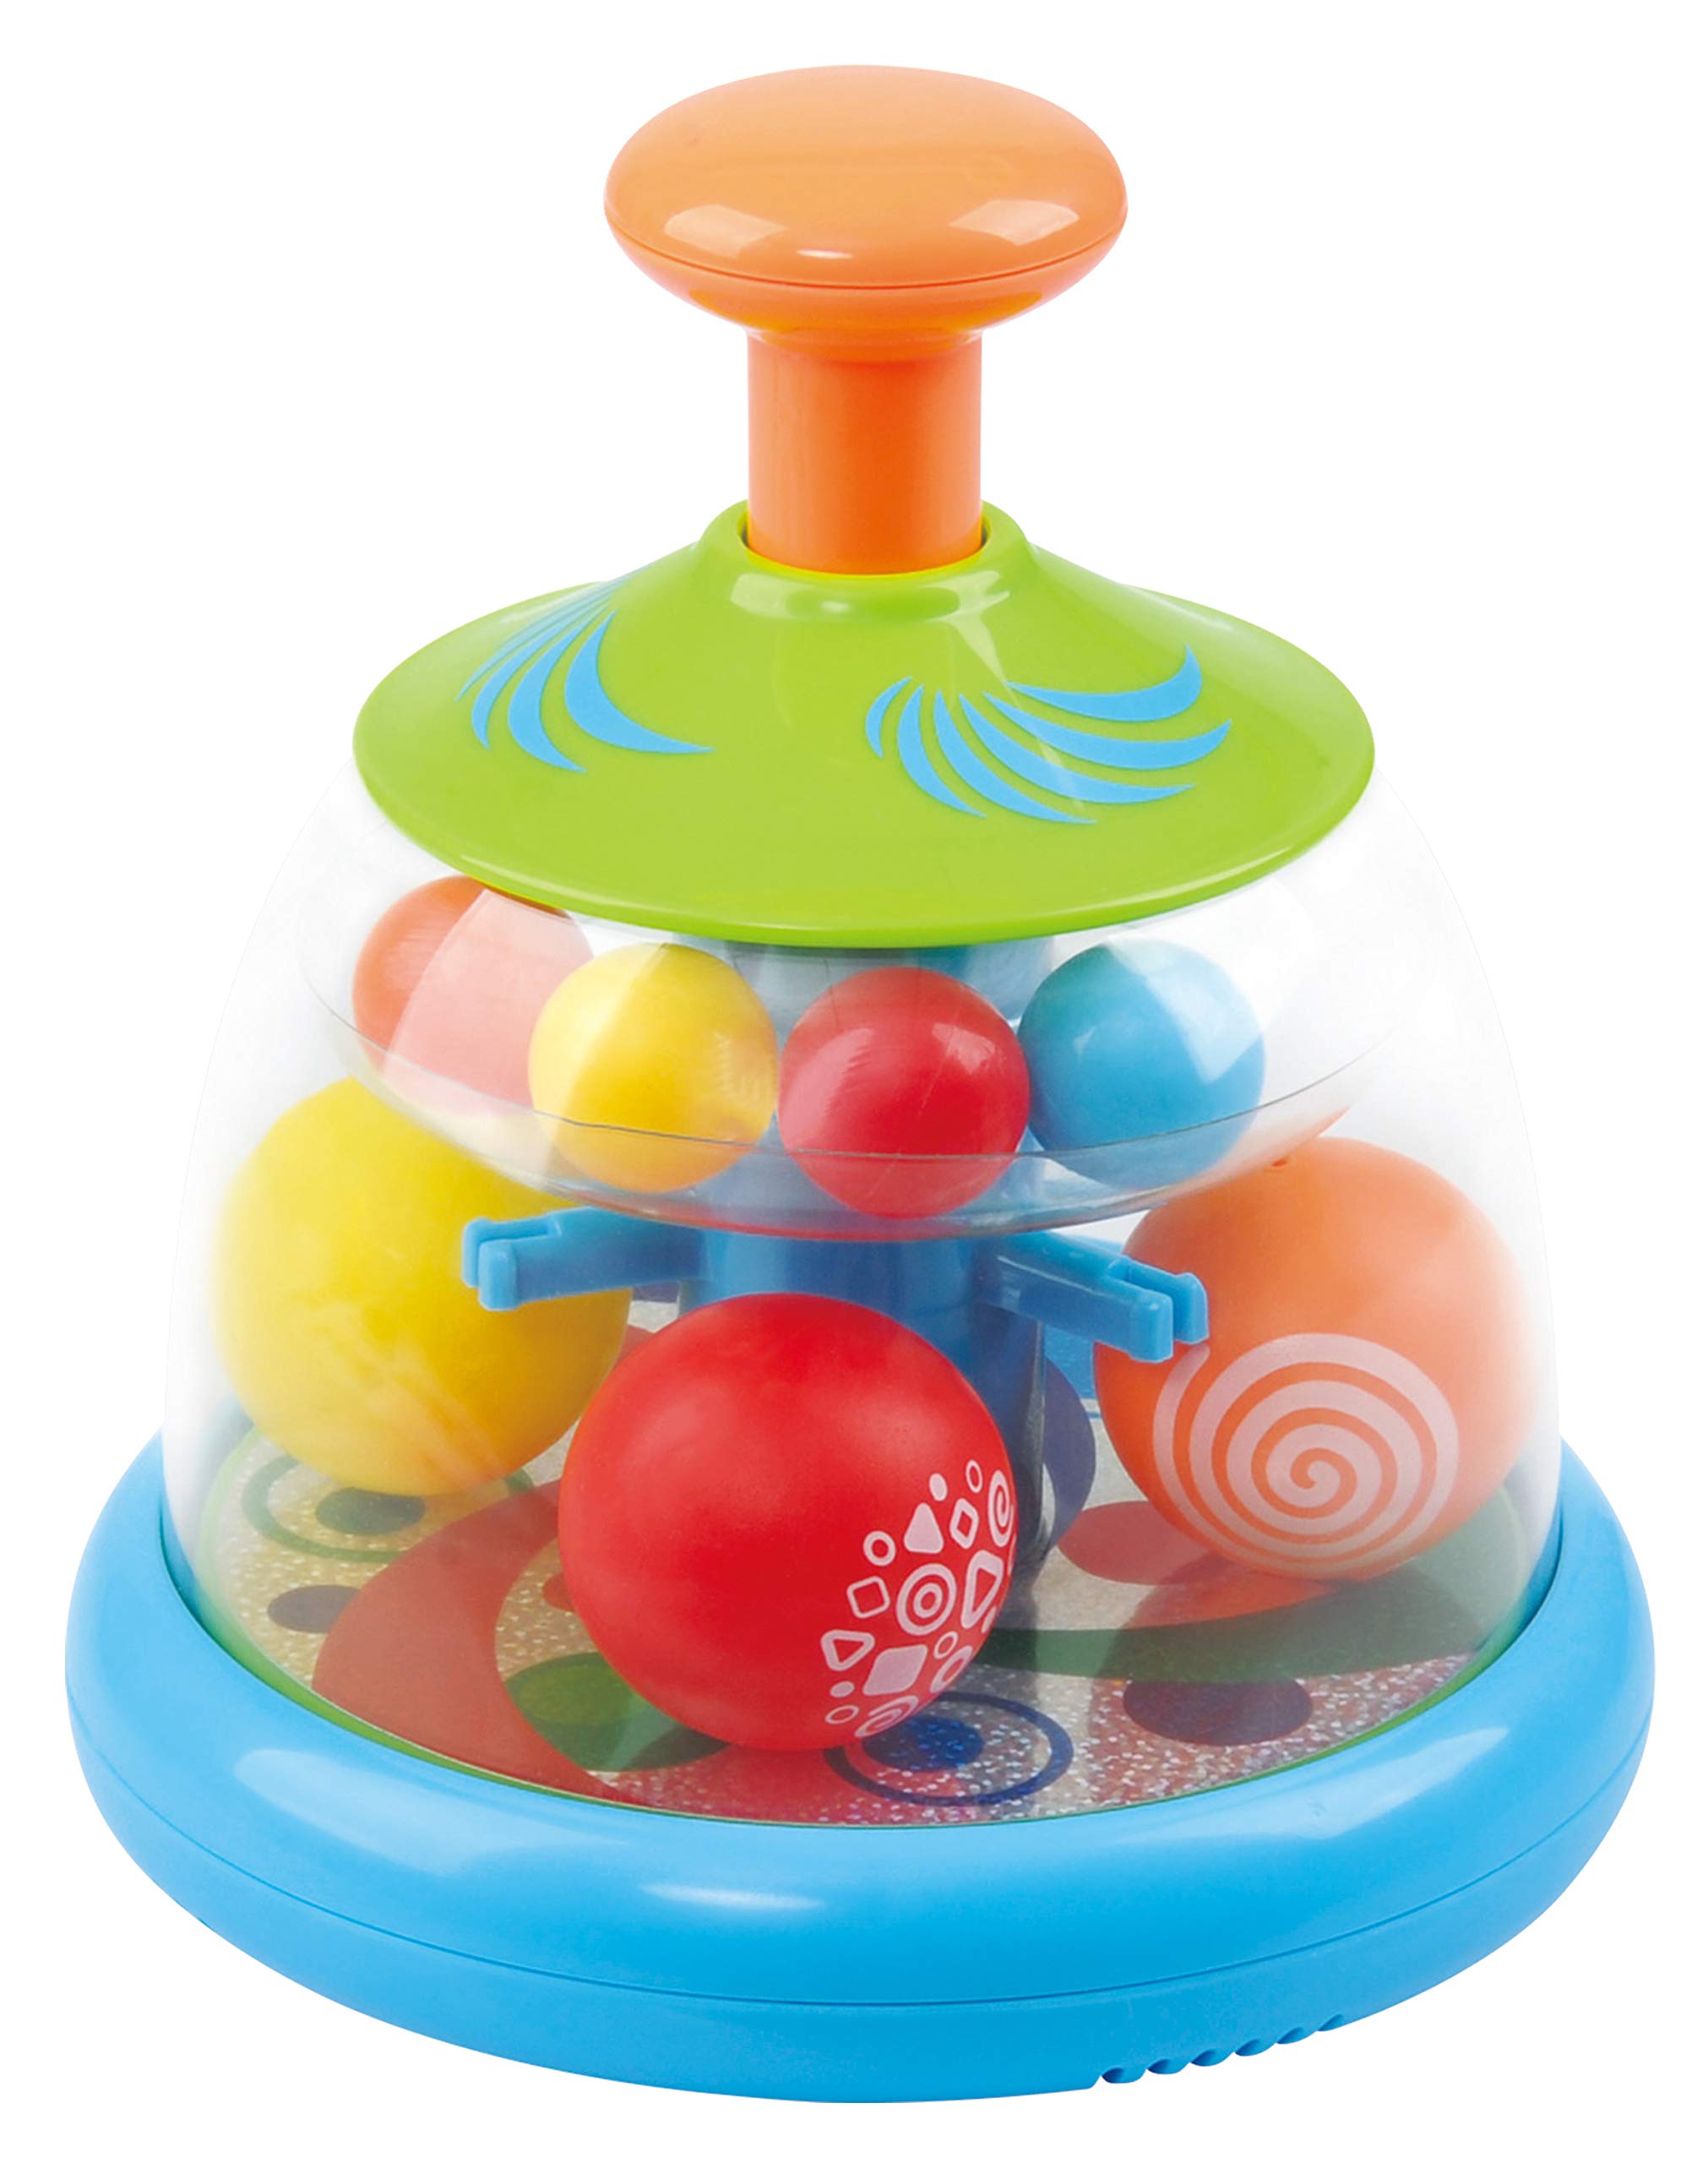 Play Popping Ball Dome Toy - Ball Popper Toys Tumble Top - Spinning Popping Make Colorful Balls Pop and Fly - Gift for 6 Month Plus Newborn Babies Infants, 1609